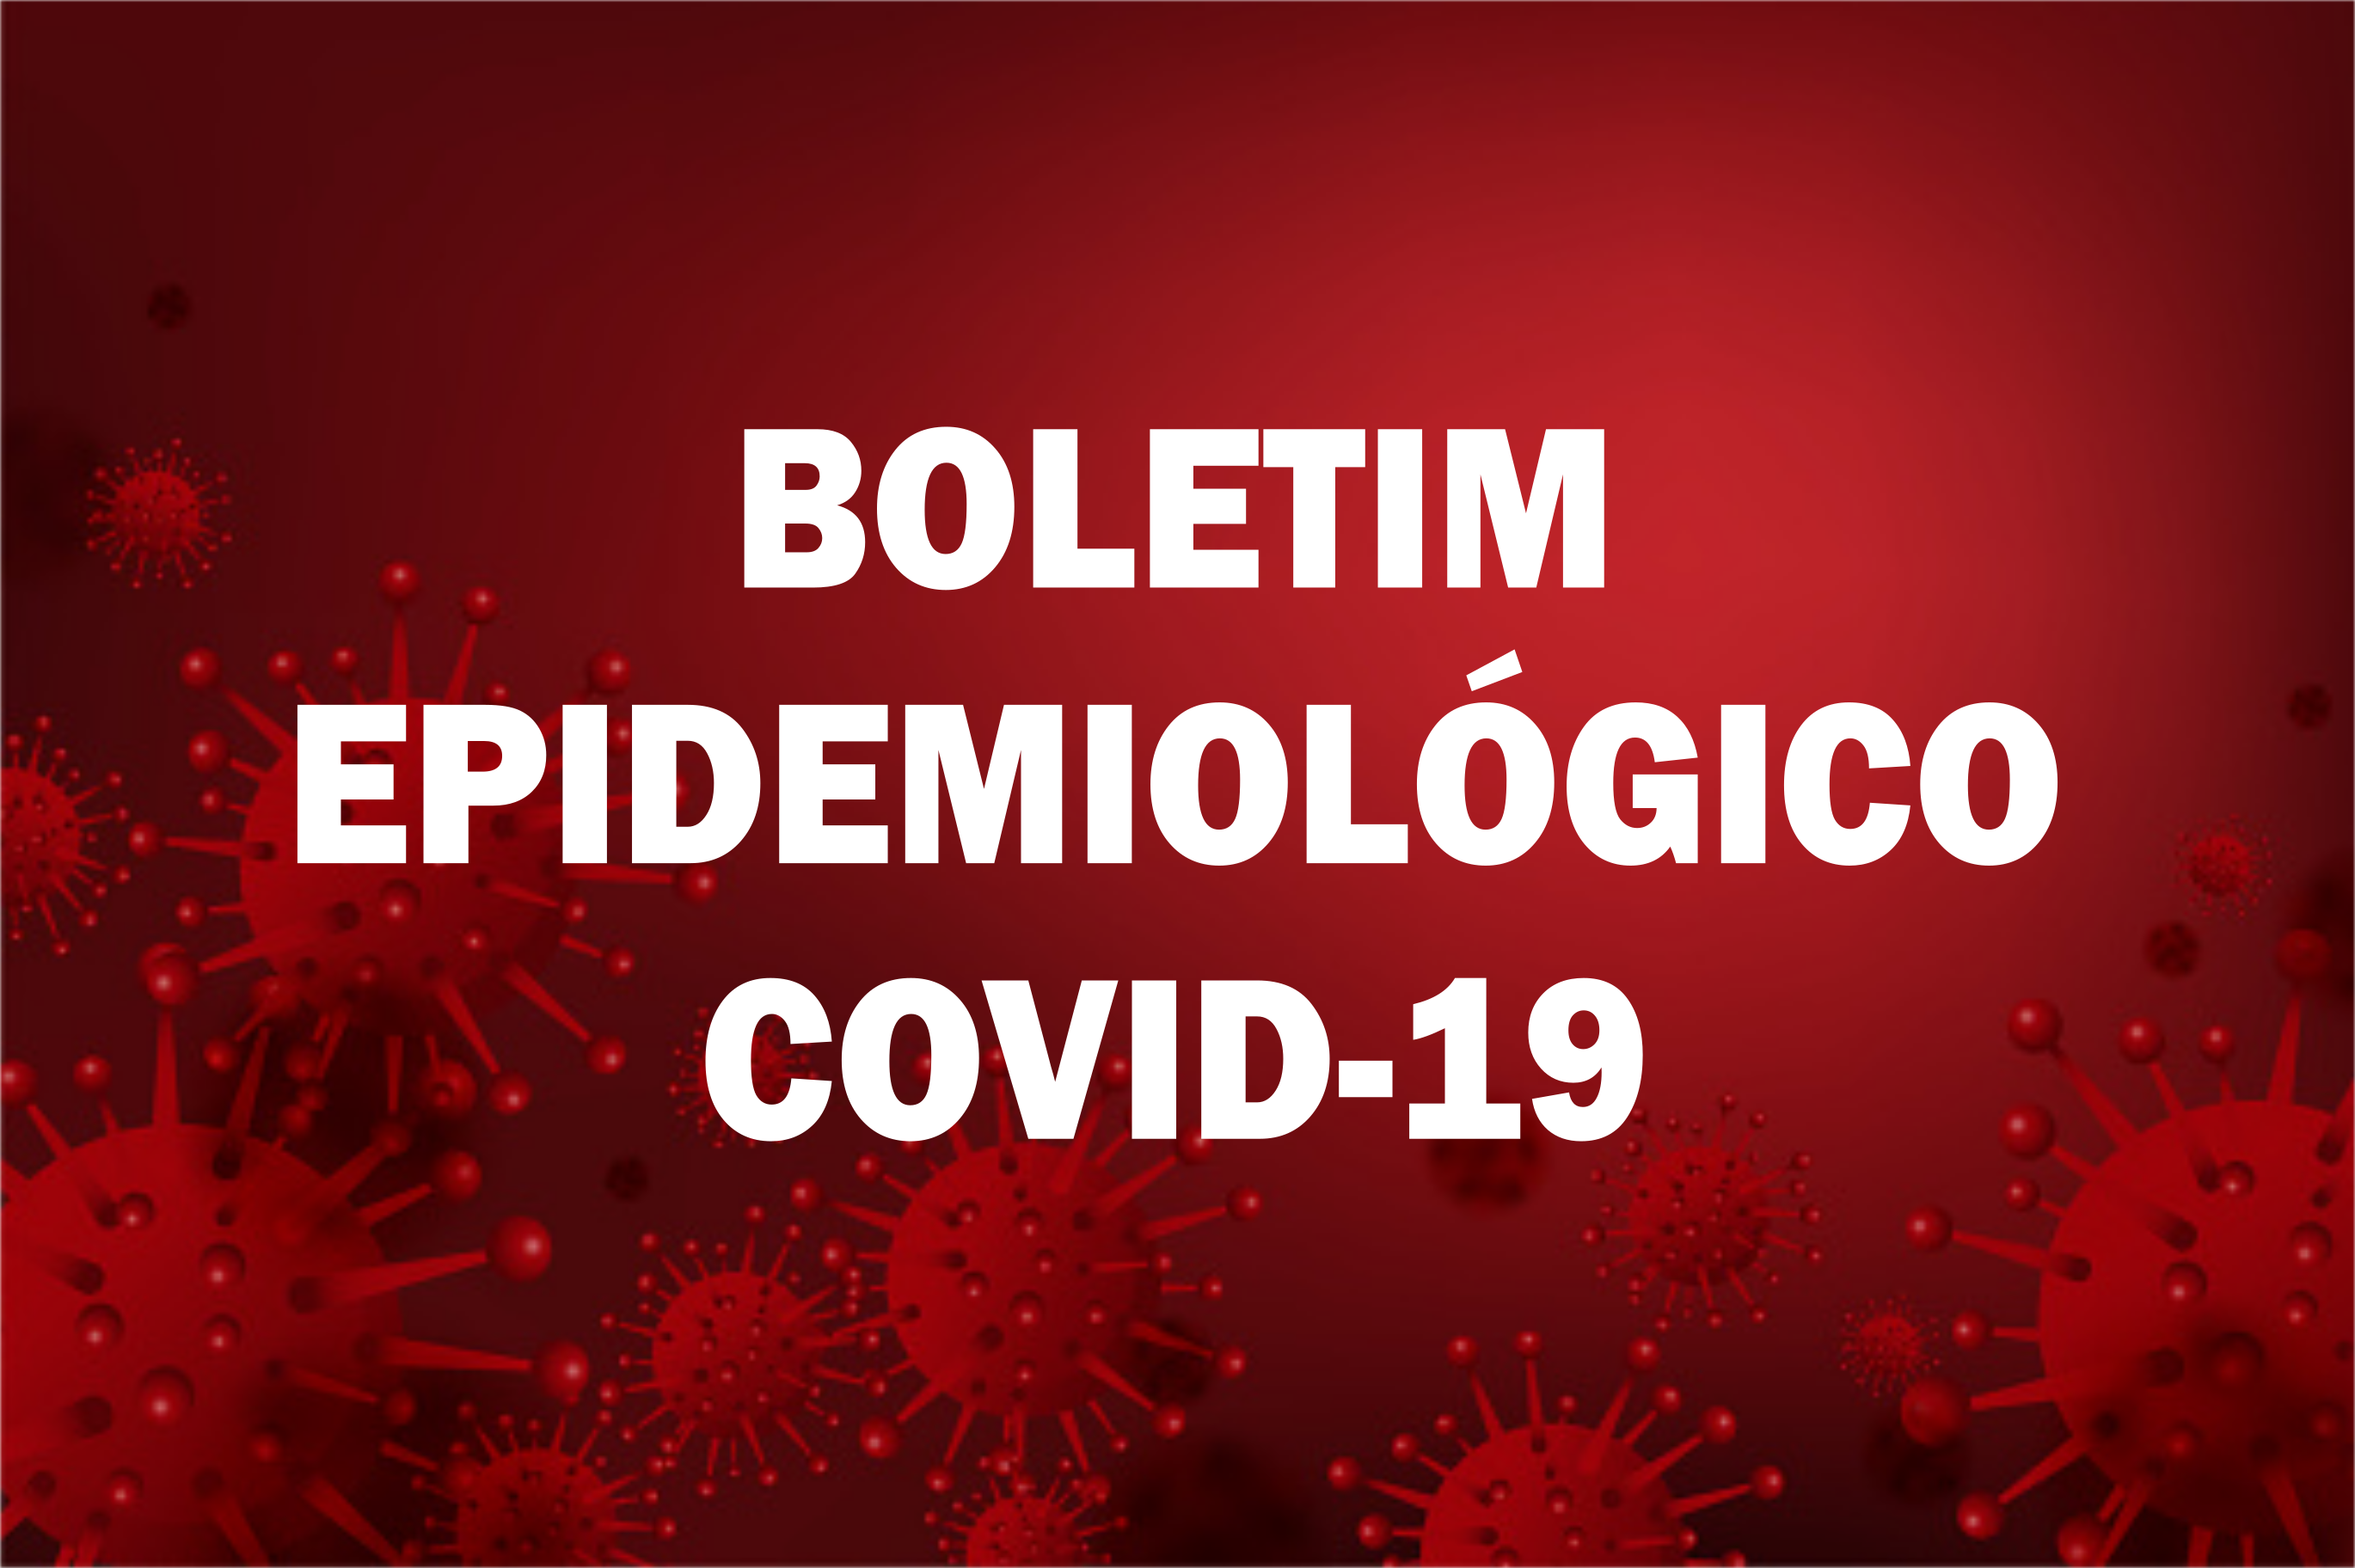 You are currently viewing BOLETIM EPIDEMIOLÓGICO Nº 132 (COVID-19)